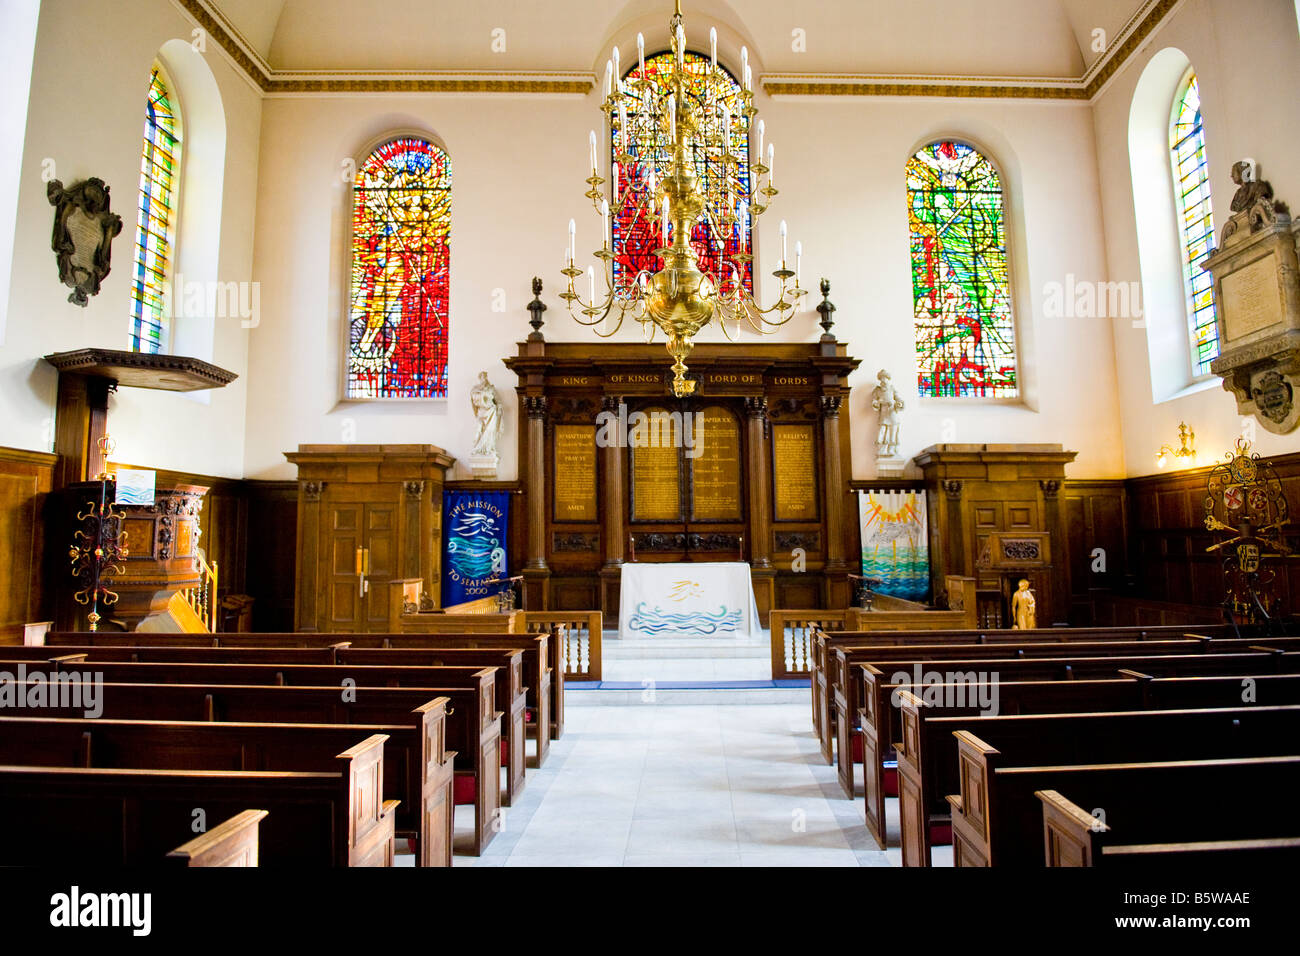 Interior of Church of St Michael Paternoster Royal , Seafarers Mission , City of London , with modern stained glass windows Stock Photo